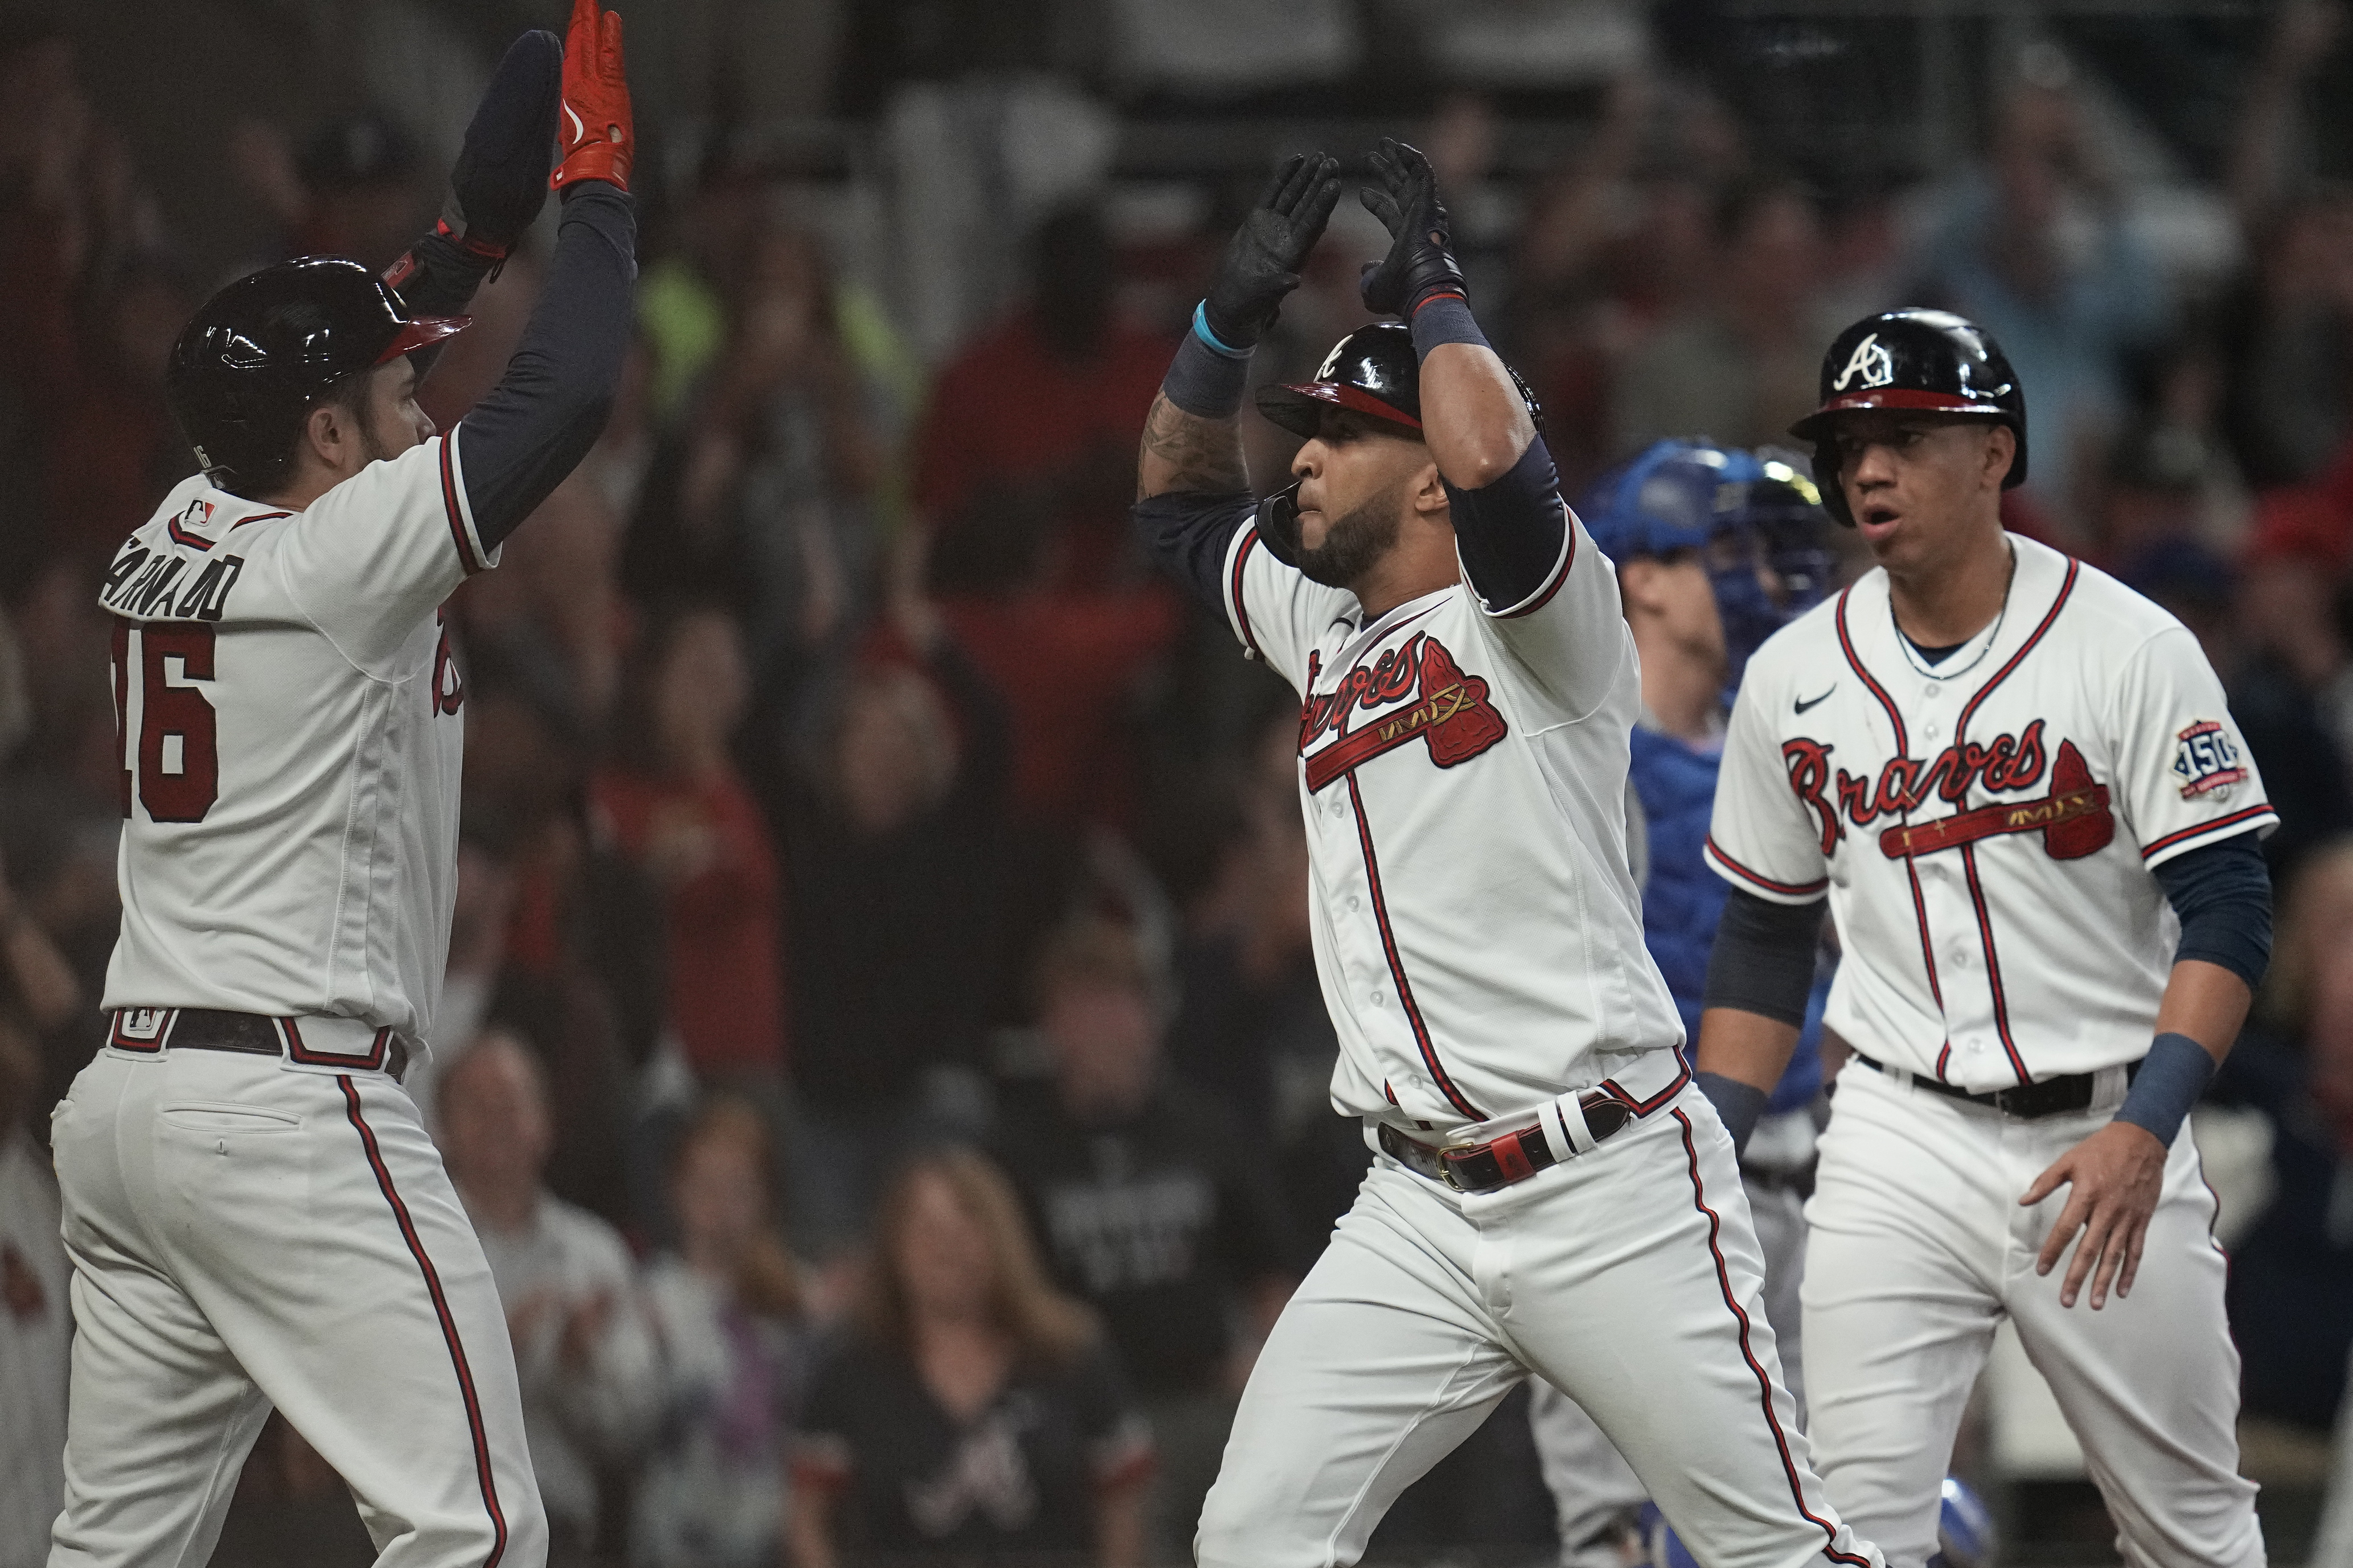 Lucky lumber: Rosario's hot bat leads Braves to Series - Seattle